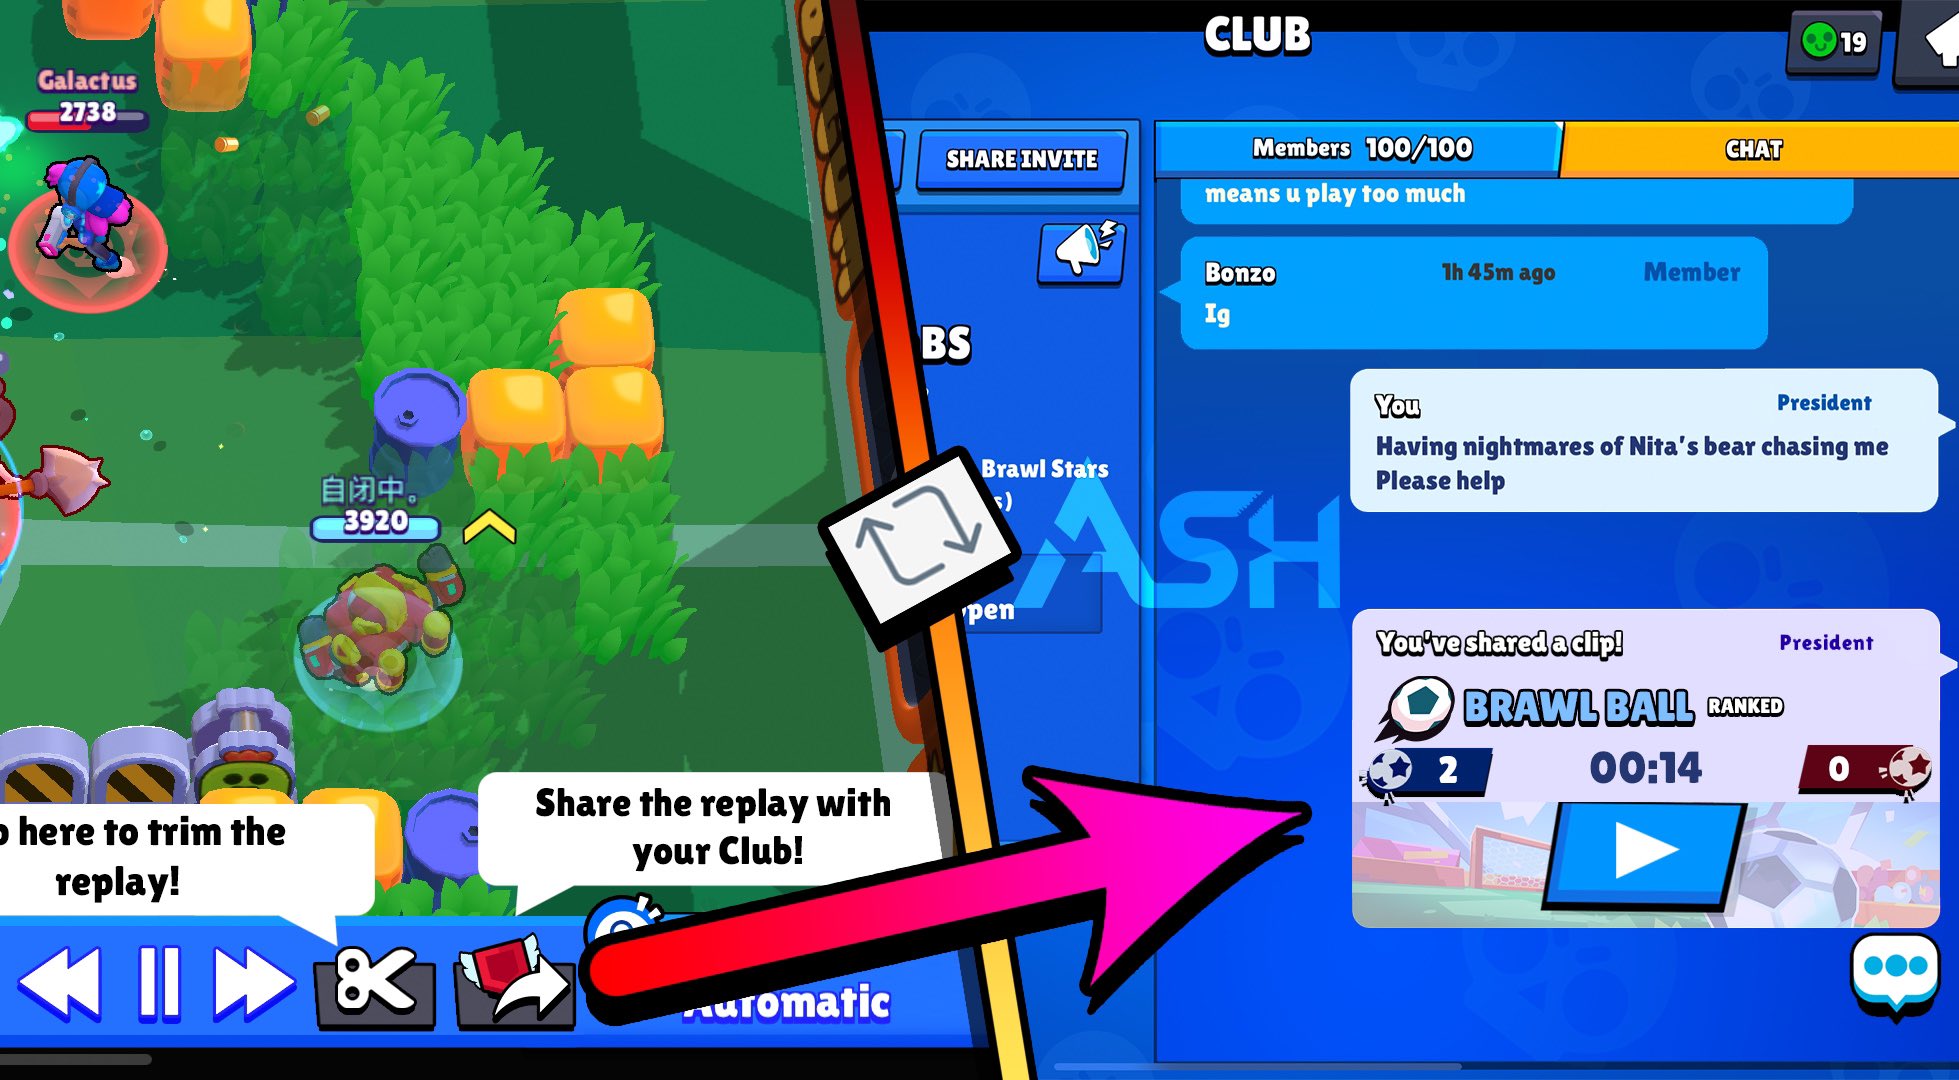 Code Ashbs On Twitter Idea In Addition To A Pause Fast Forward And Rewind Option In Replays Having An Option To Clip Parts Of A Replay And Share It To Your Club - brawl star where find replay